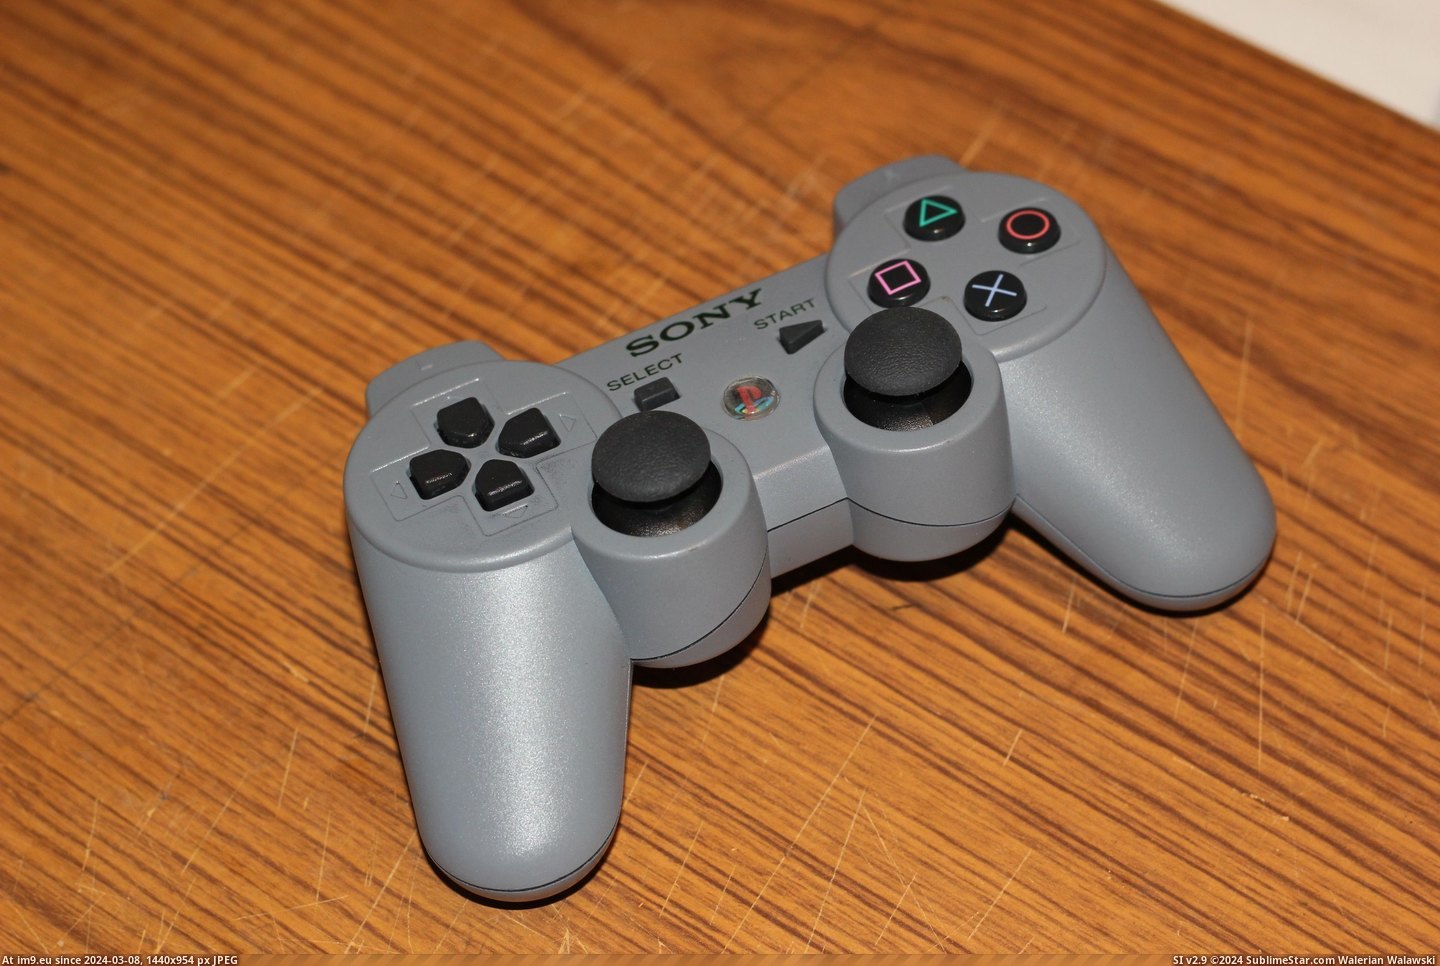 #Gaming #Style #Dualshock #Controller #Modded [Gaming] Modded my Dualshock 3 Controller, Dualshock 1 style. [OC] 4 Pic. (Image of album My r/GAMING favs))